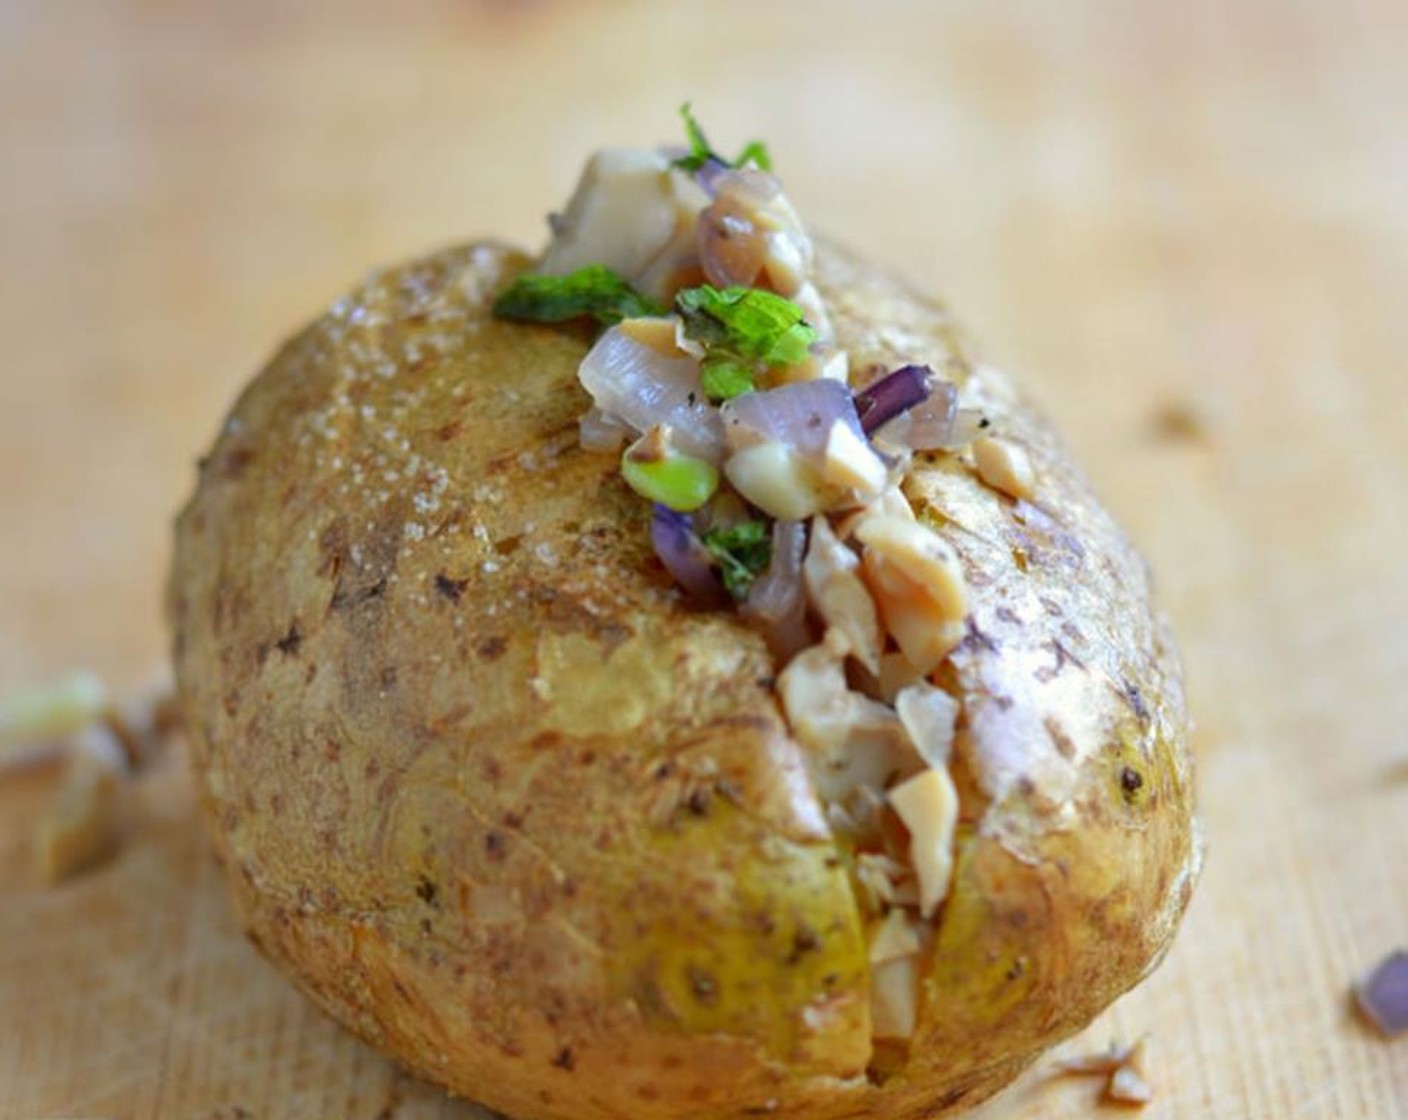 step 8 Spoon a generous amount of onion and mushroom mixture into the baked potato. Serve and enjoy!